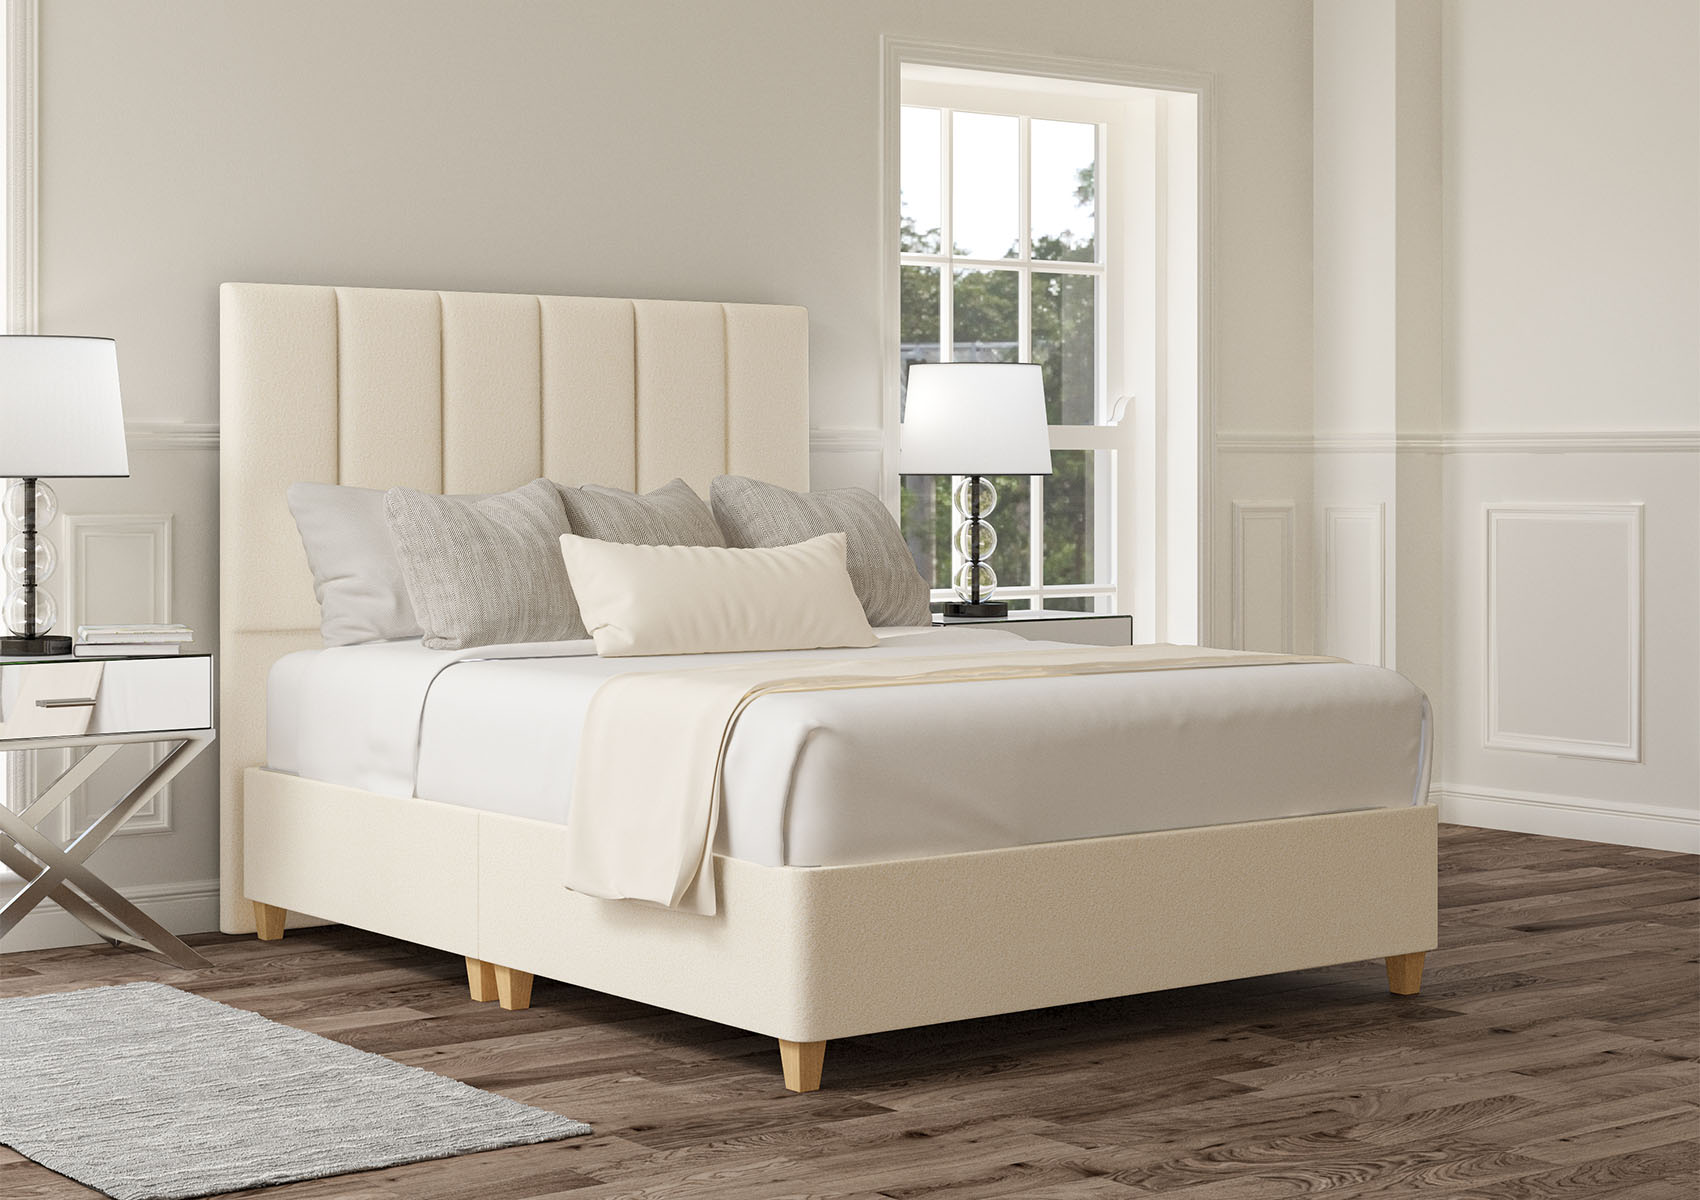 View Empire Heritage Royal Upholstered King Size Divan Bed Time4Sleep information